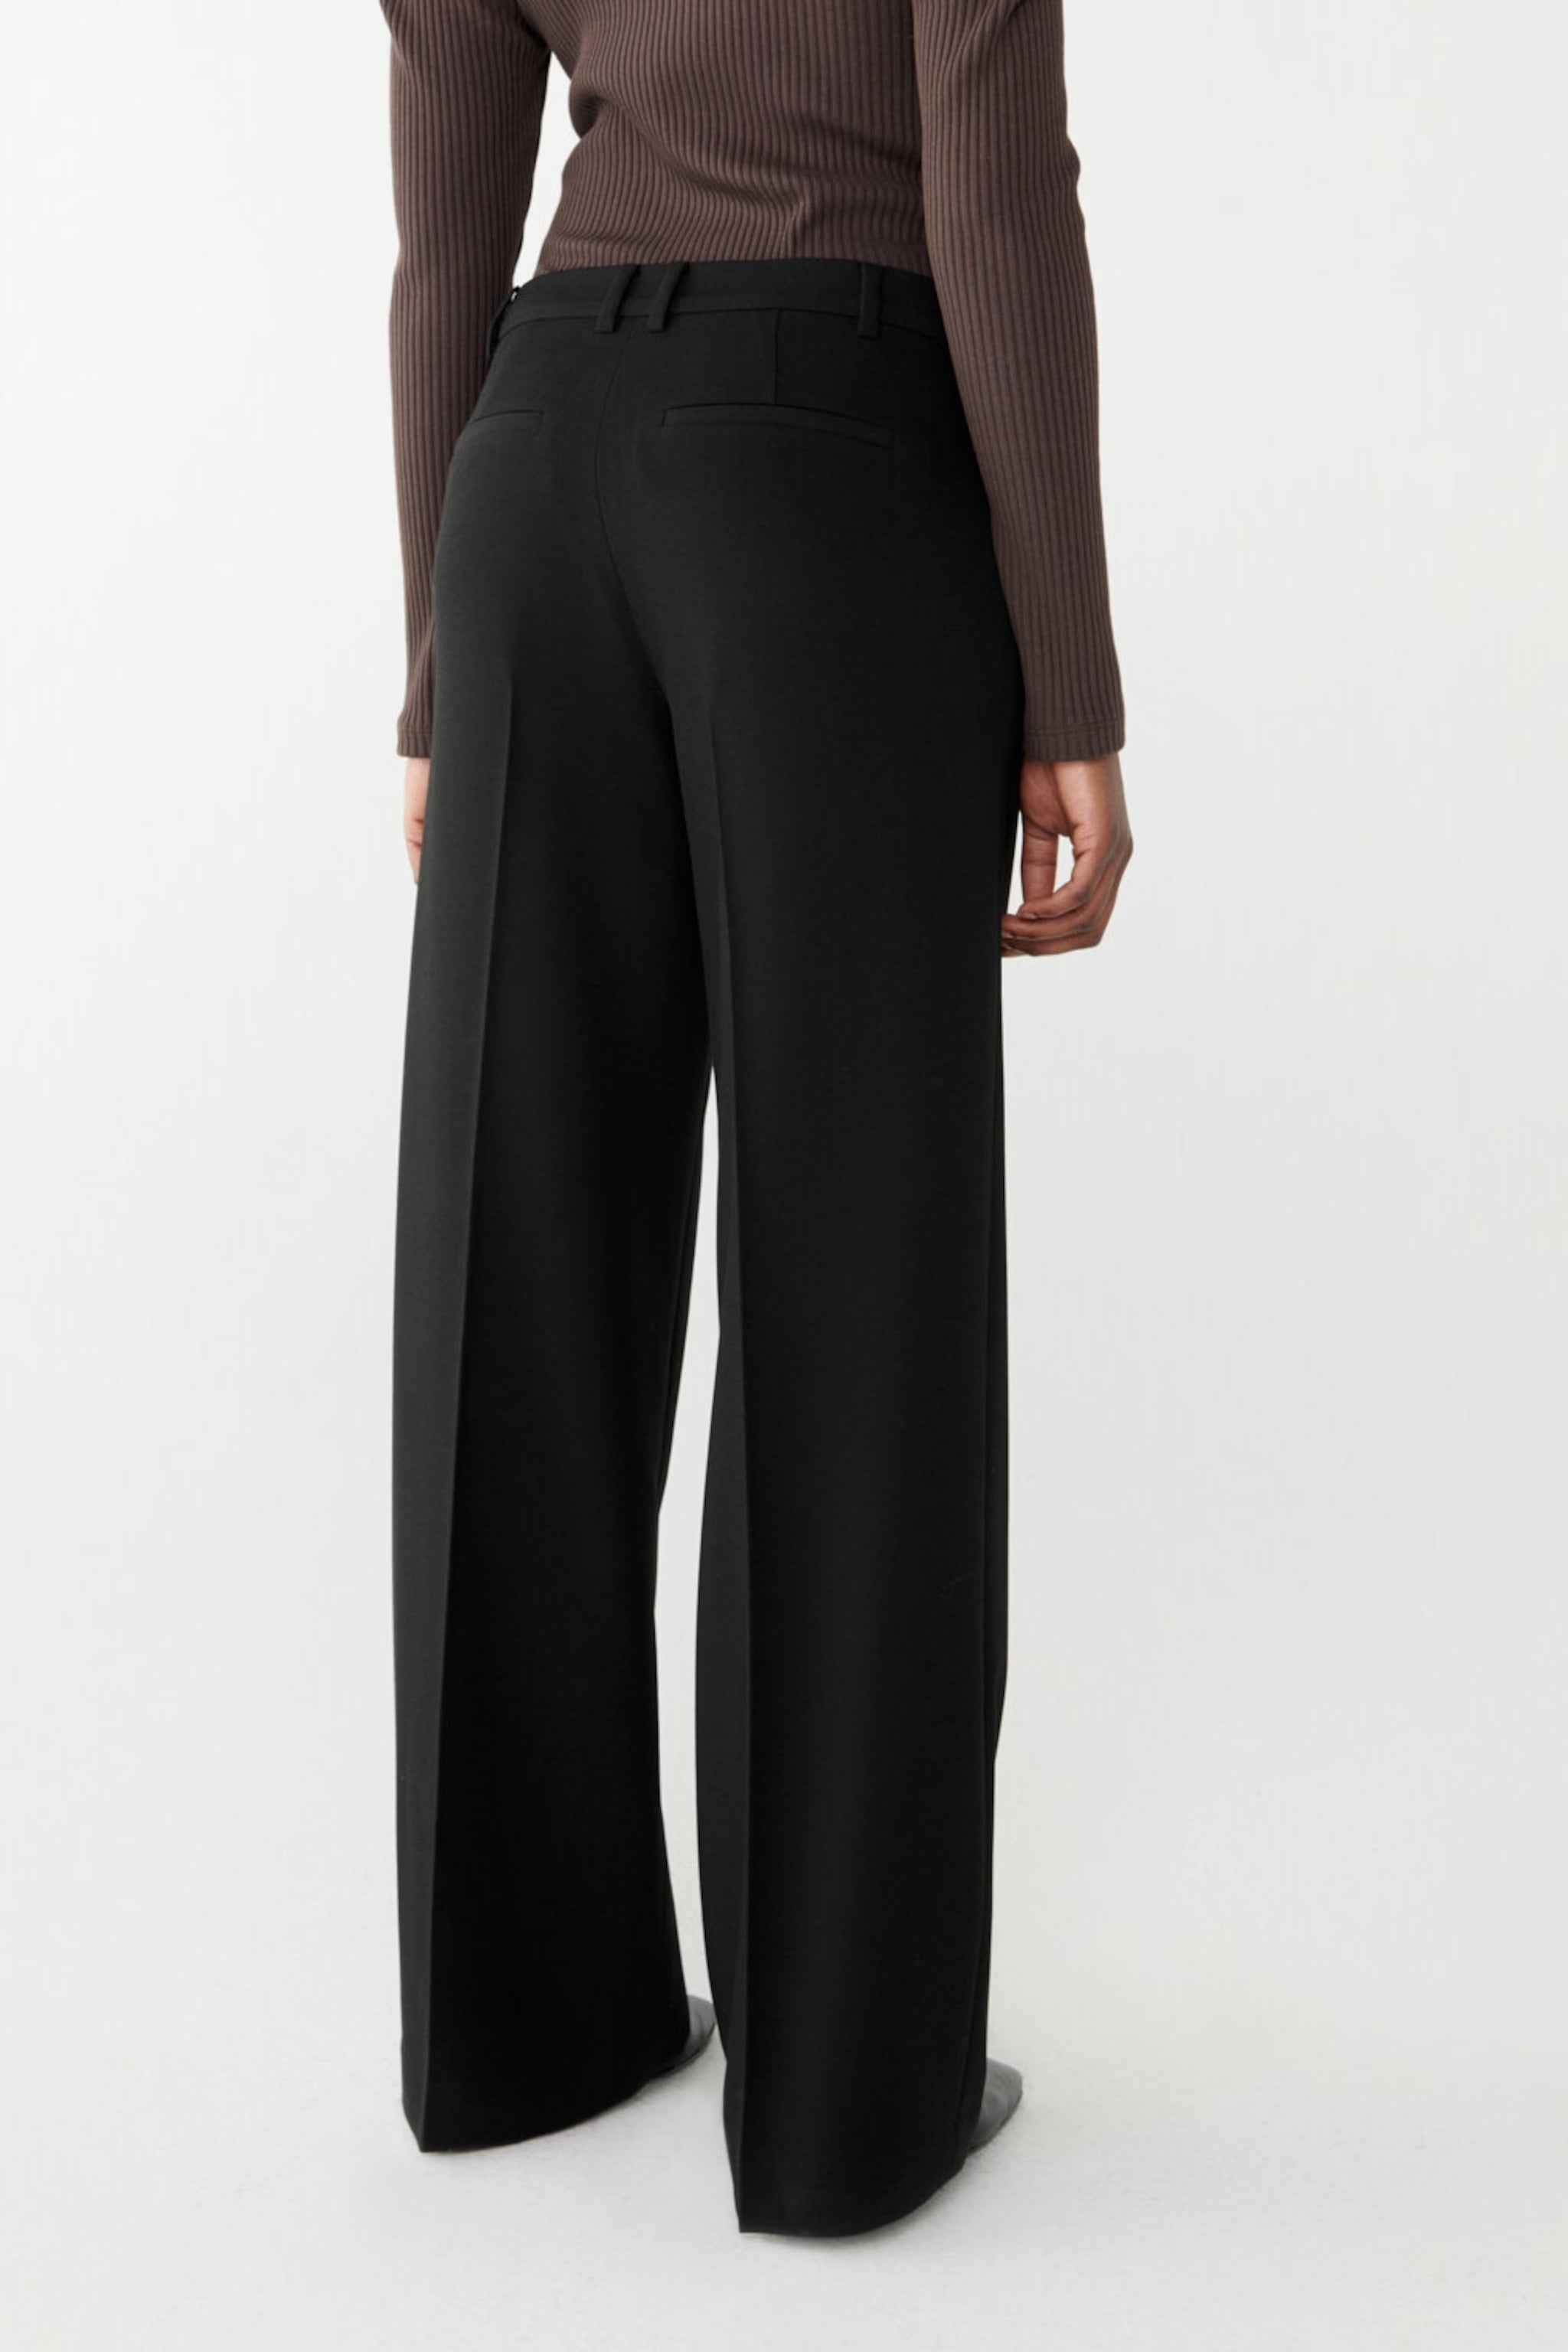 TWIST AND TANGO-TRACY TROUSERS BLACK-JUST BRAZIL